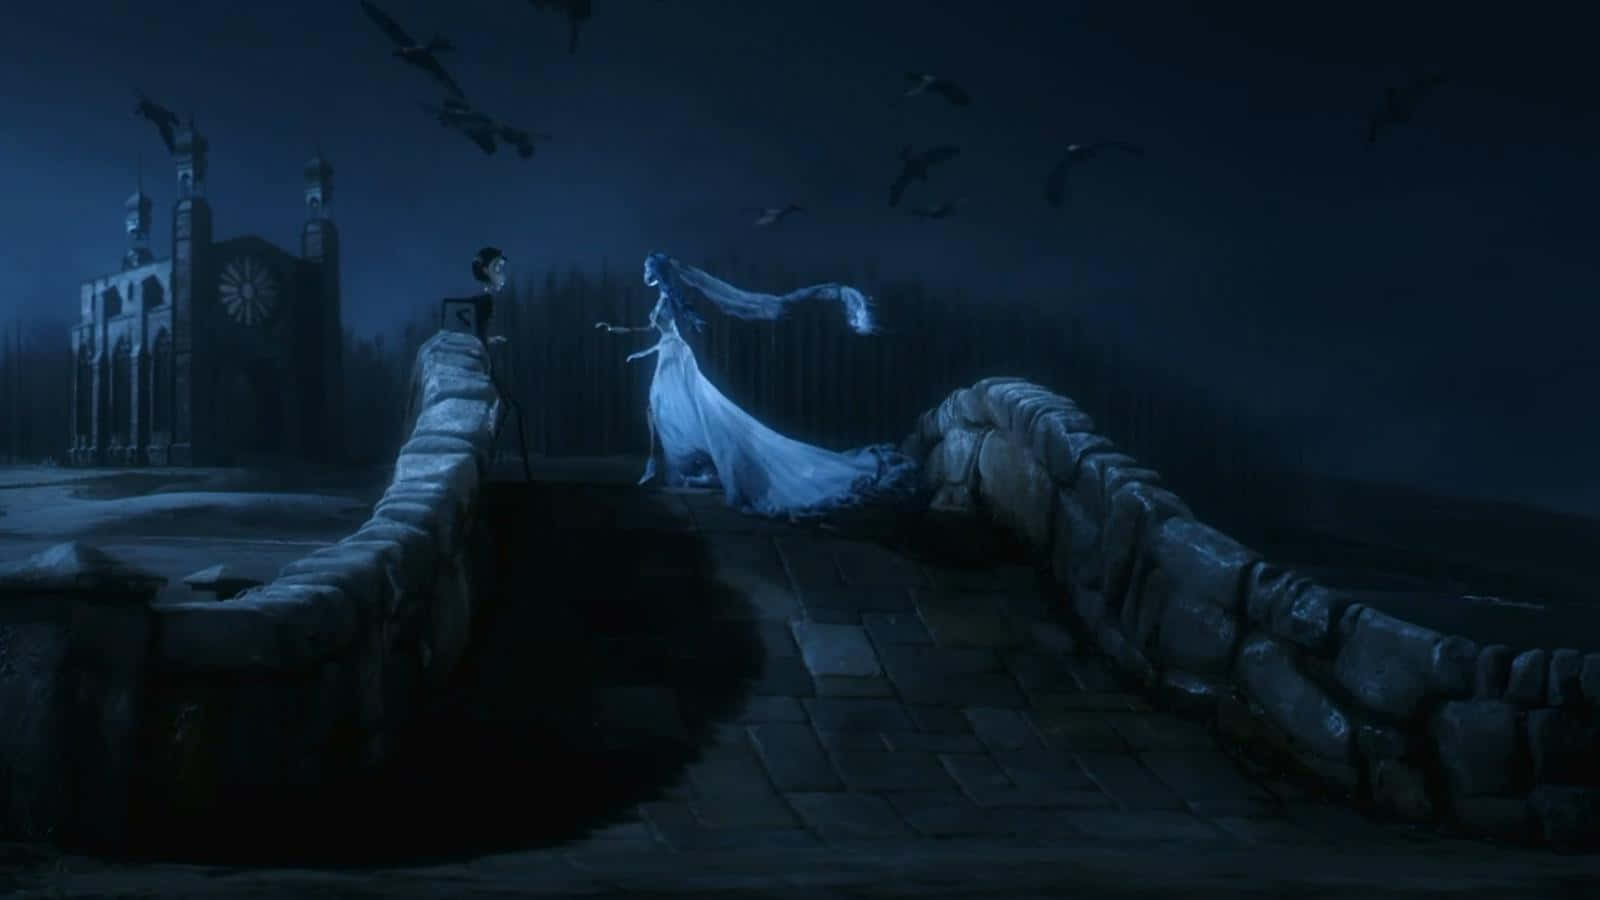 The Corpse Bride and Victor embrace in a moonlit forest